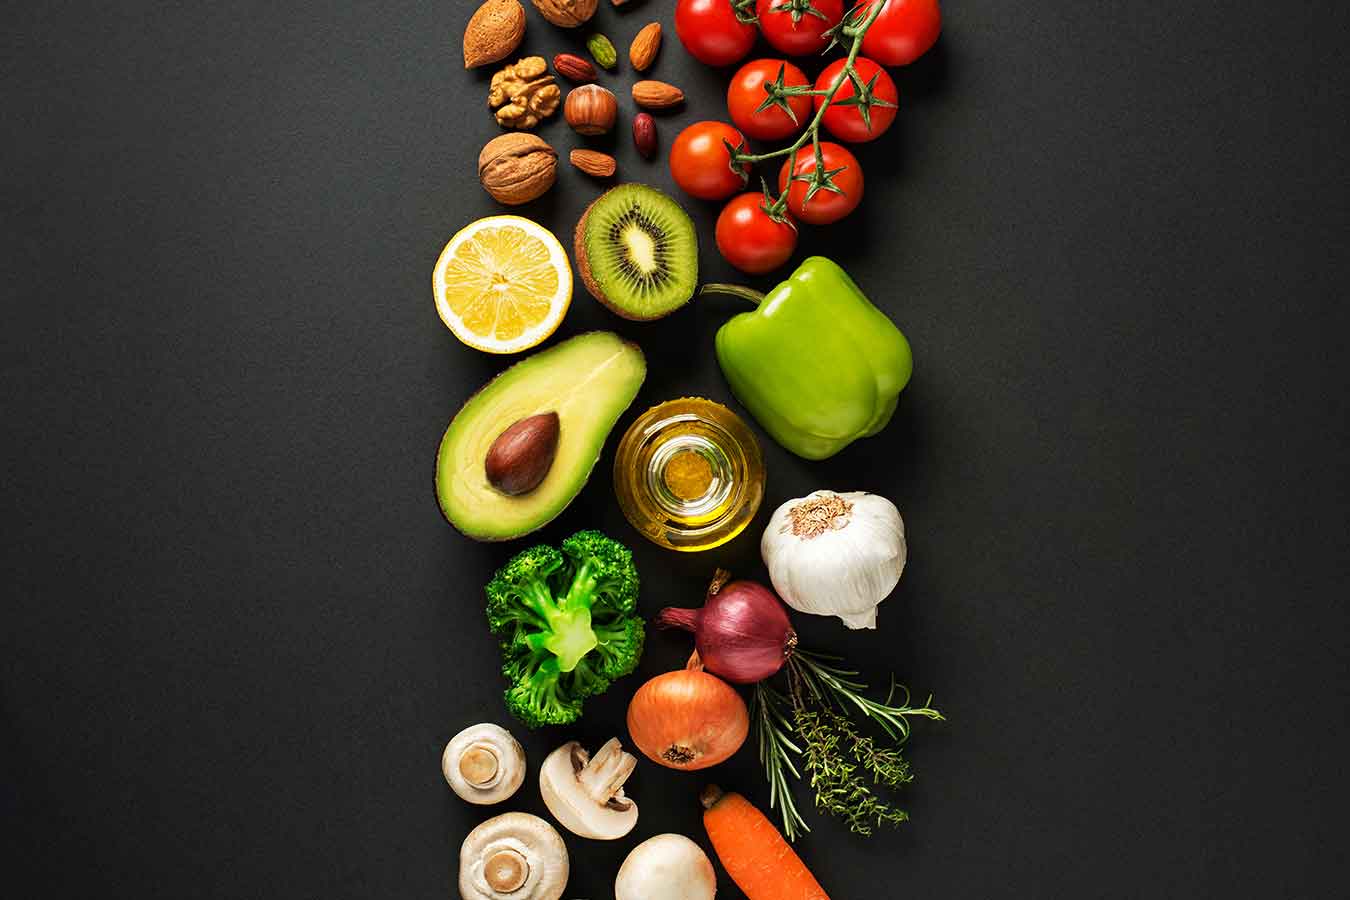 A grey background with fresh groceries placed in a line down the center featuring nuts, tomatoes, a lemon, kiwi, green pepper, avocado, jar, broccoli, garlic, onions, mushrooms, and a carrot. 